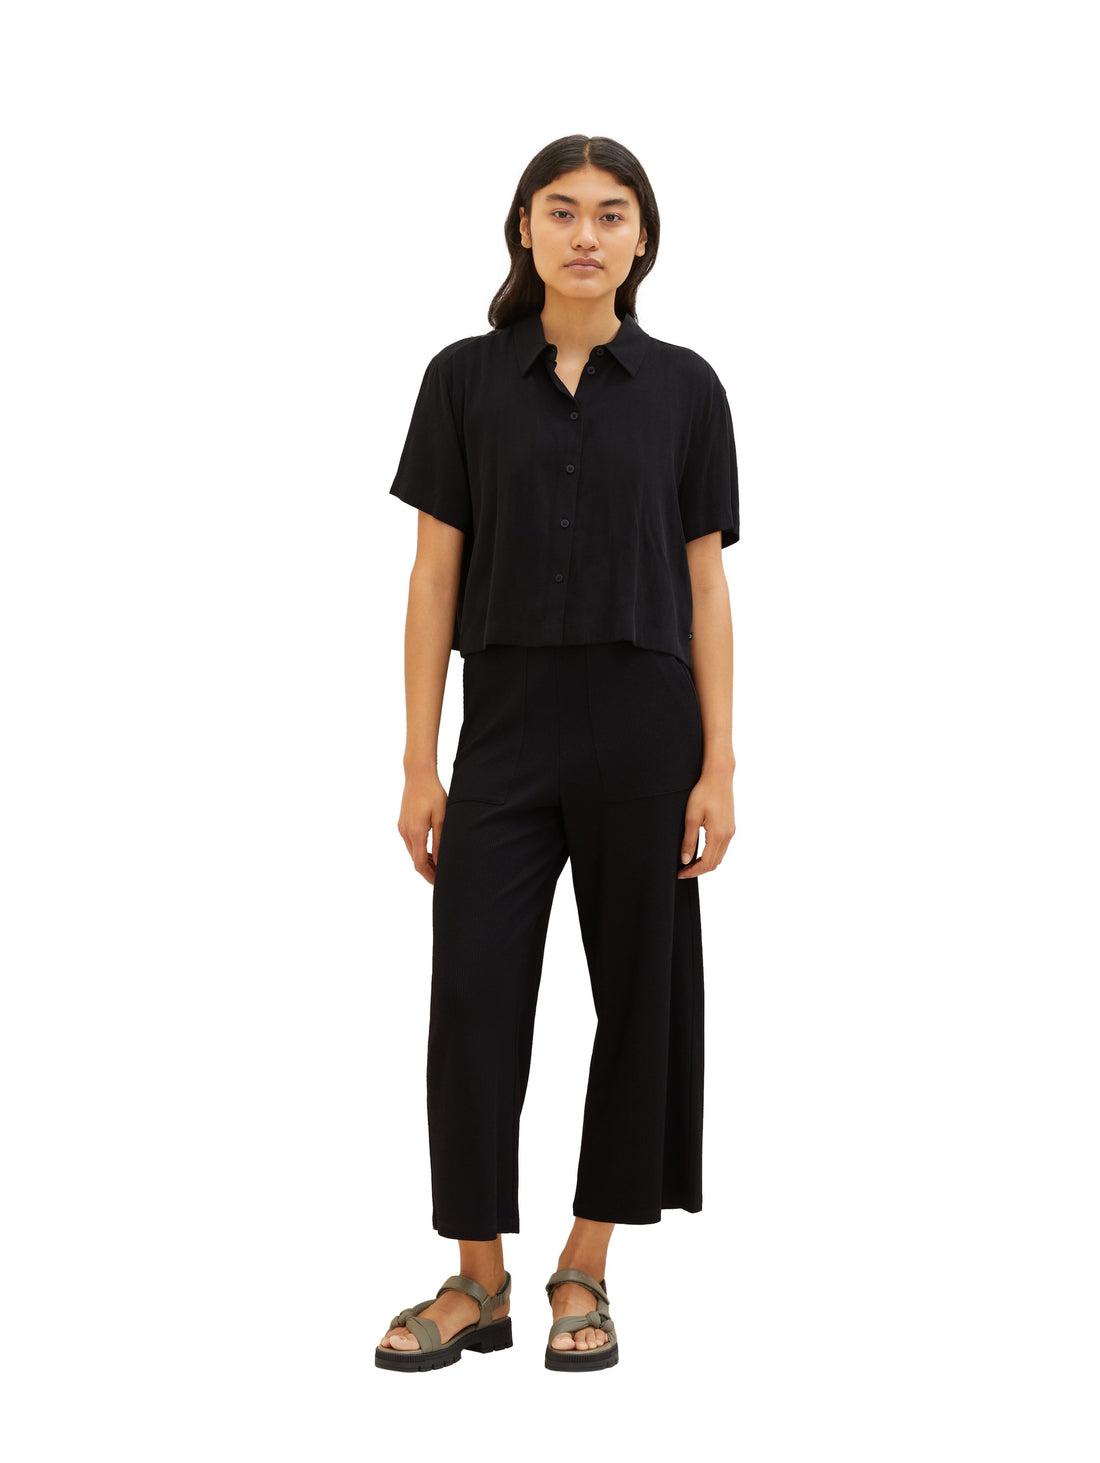 Cropped Slip On Trousers With Pockets_1038220_14482_04